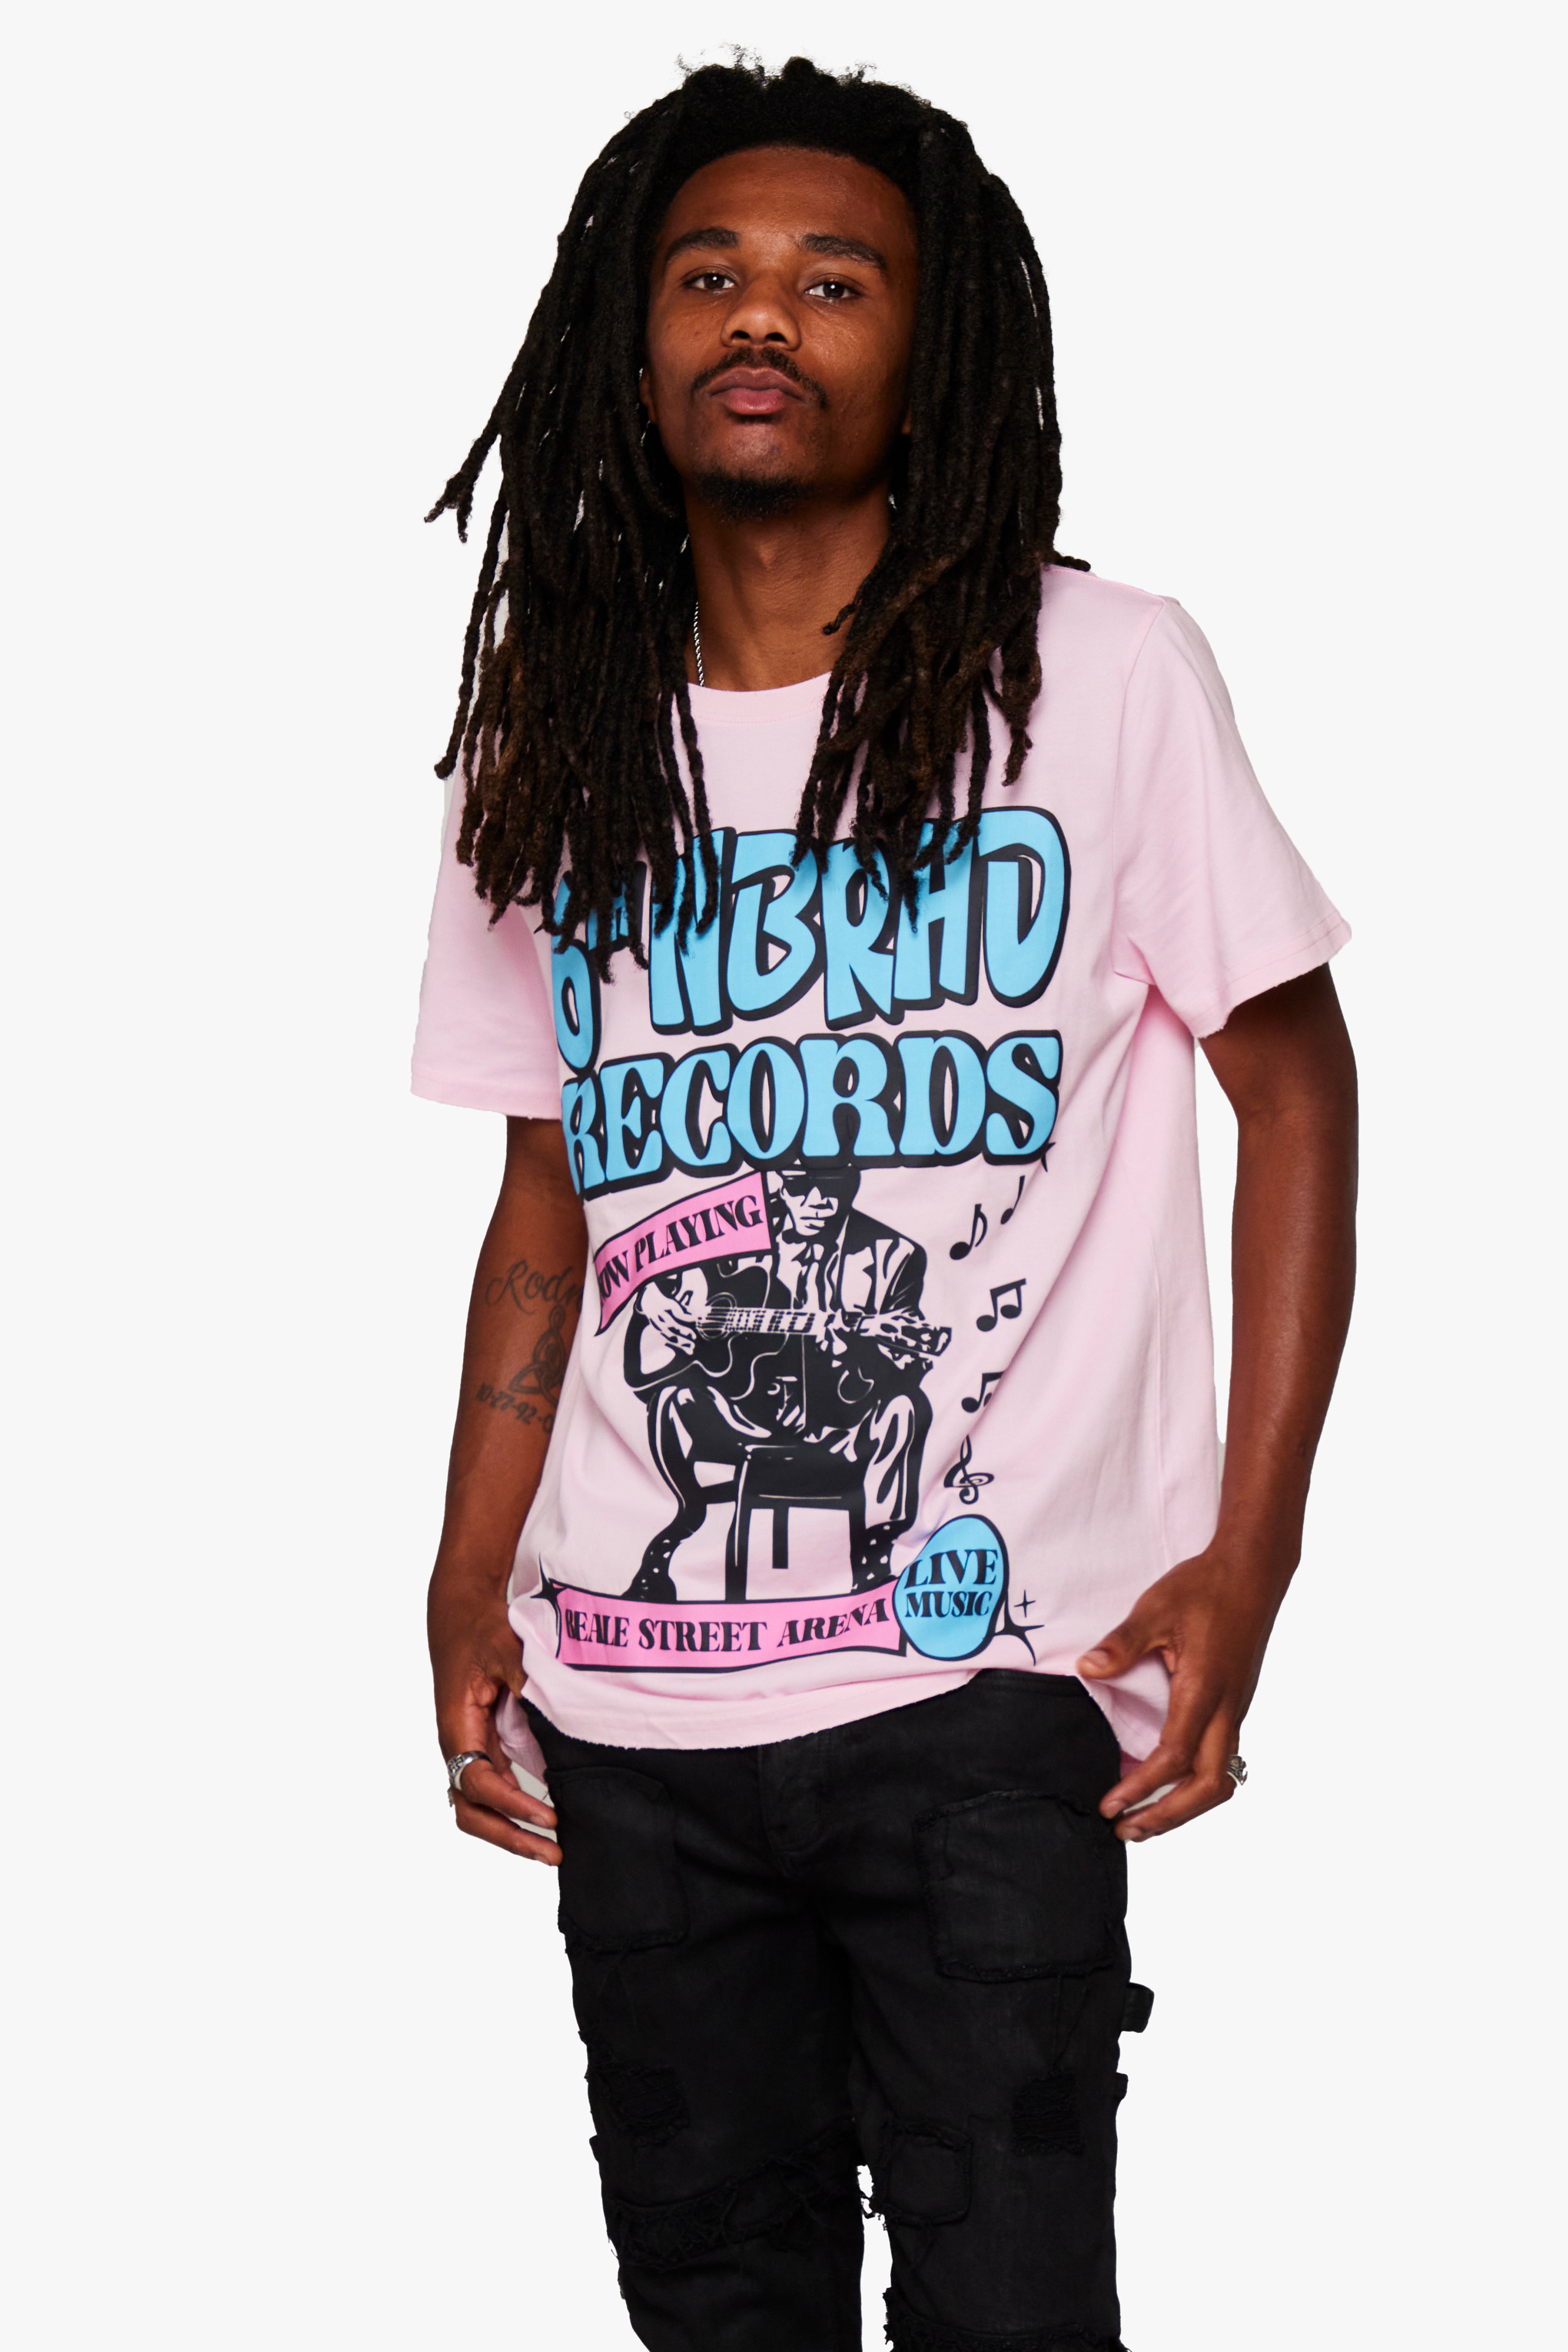 6thNBRHD TEE "NOW PLAYING" PINK